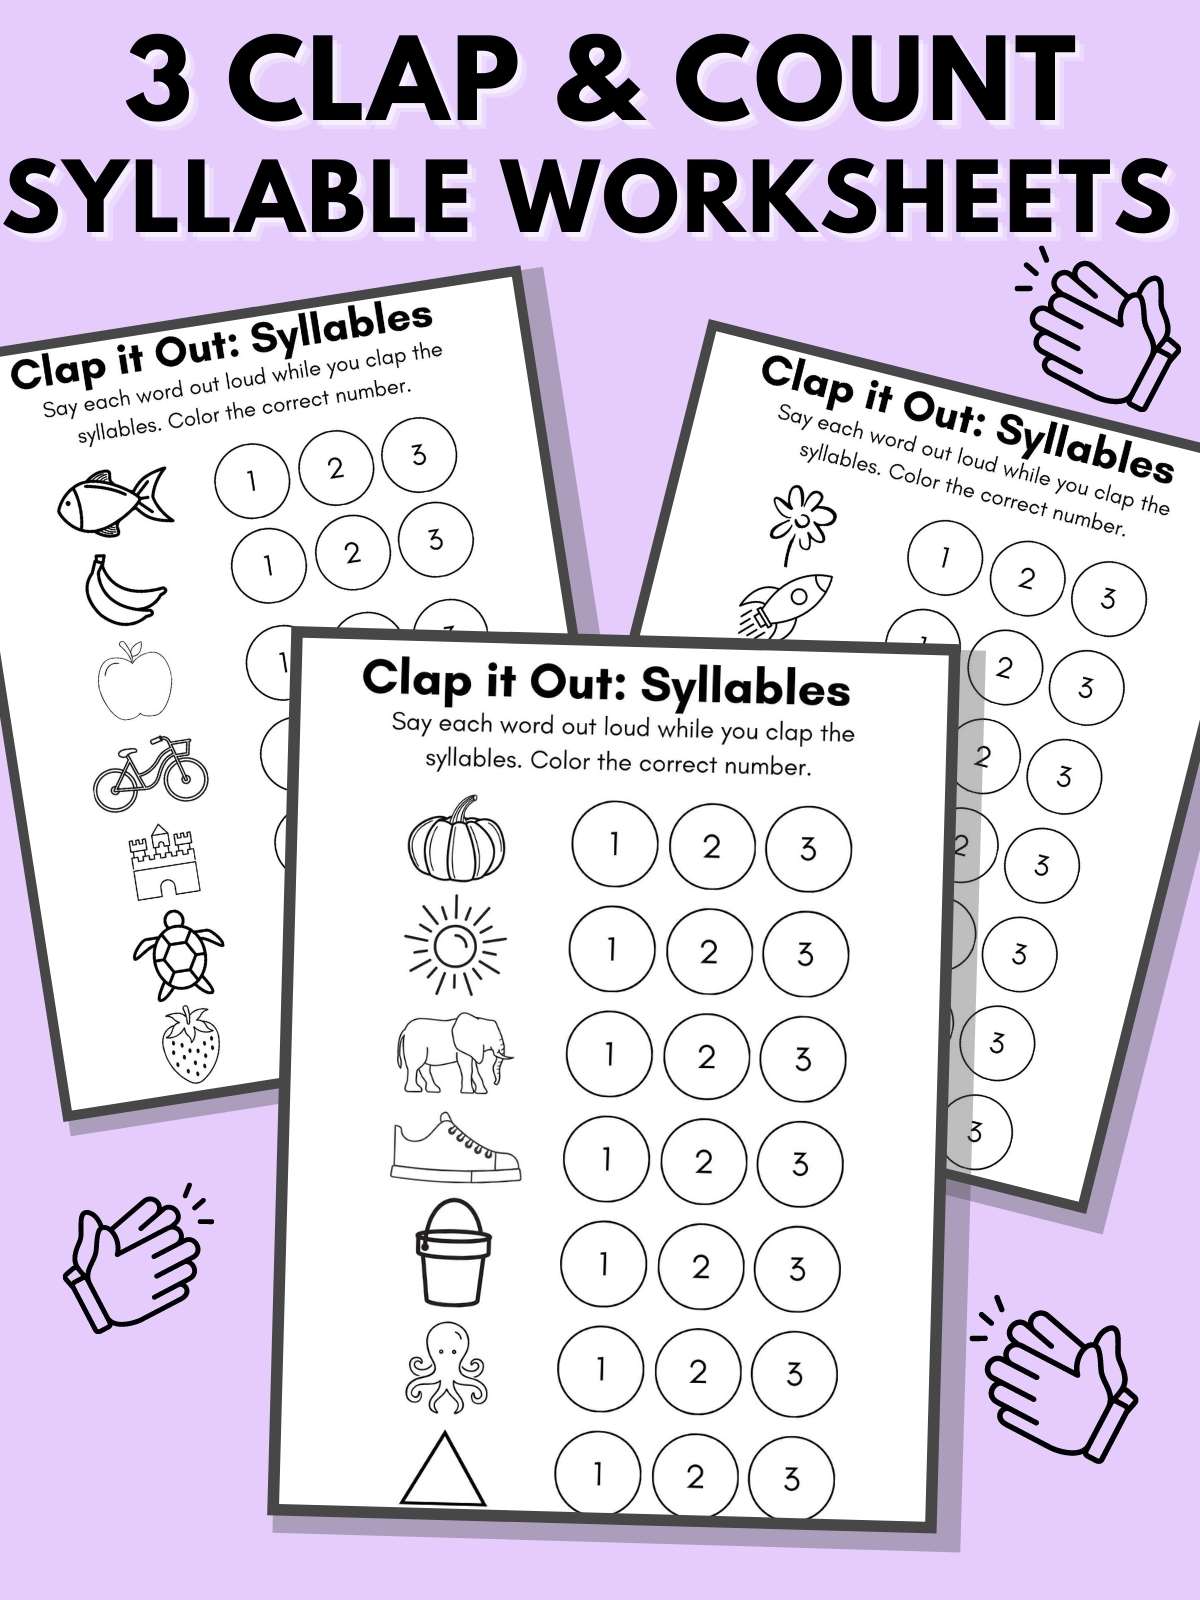 Three counting syllables worksheets on a purple background with the words "3 Clap and Count Syllable Worksheets."